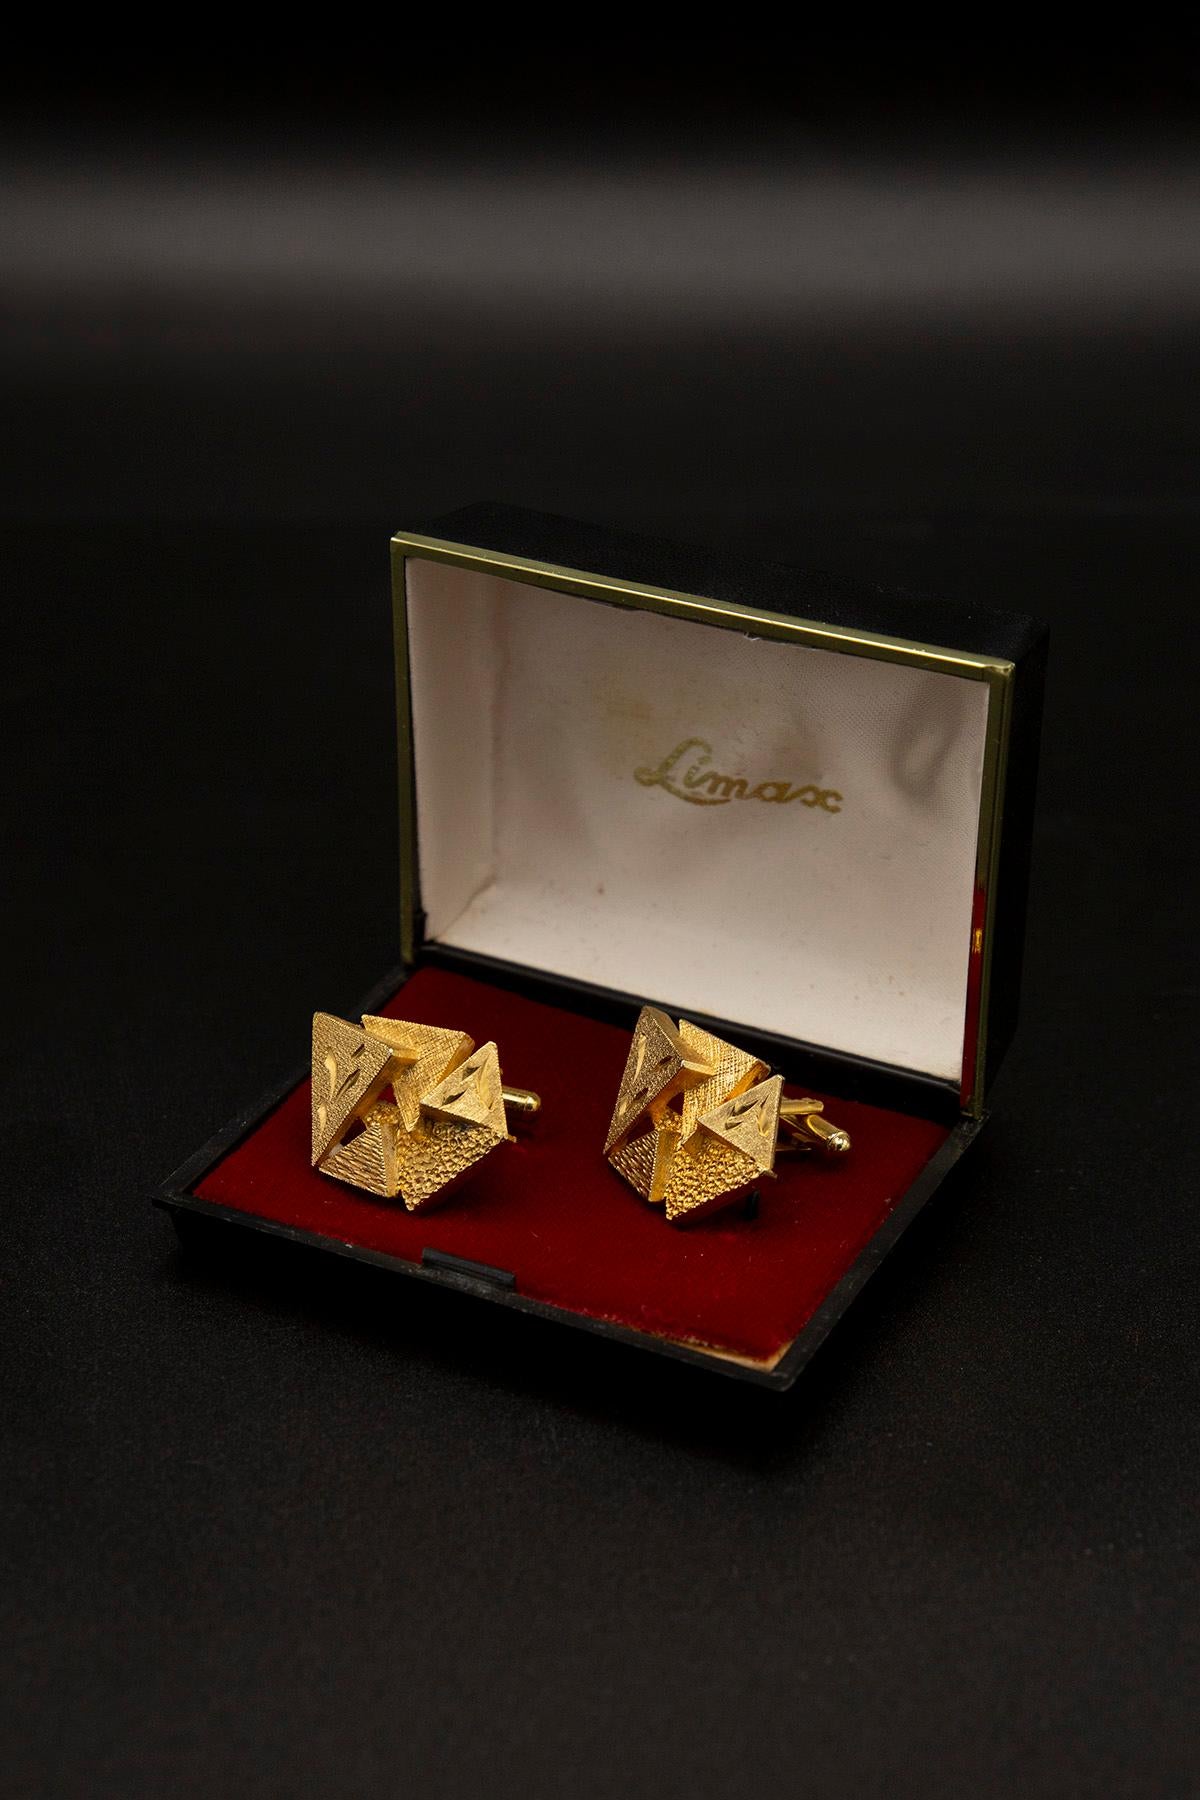 Step back in time to the glamorous era of the 1920s-30s, when sophistication and artistry were in full bloom. Imagine the allure of a pair of gold metal cufflinks, meticulously crafted in the Italian Brutalist style, waiting to adorn your wrists.